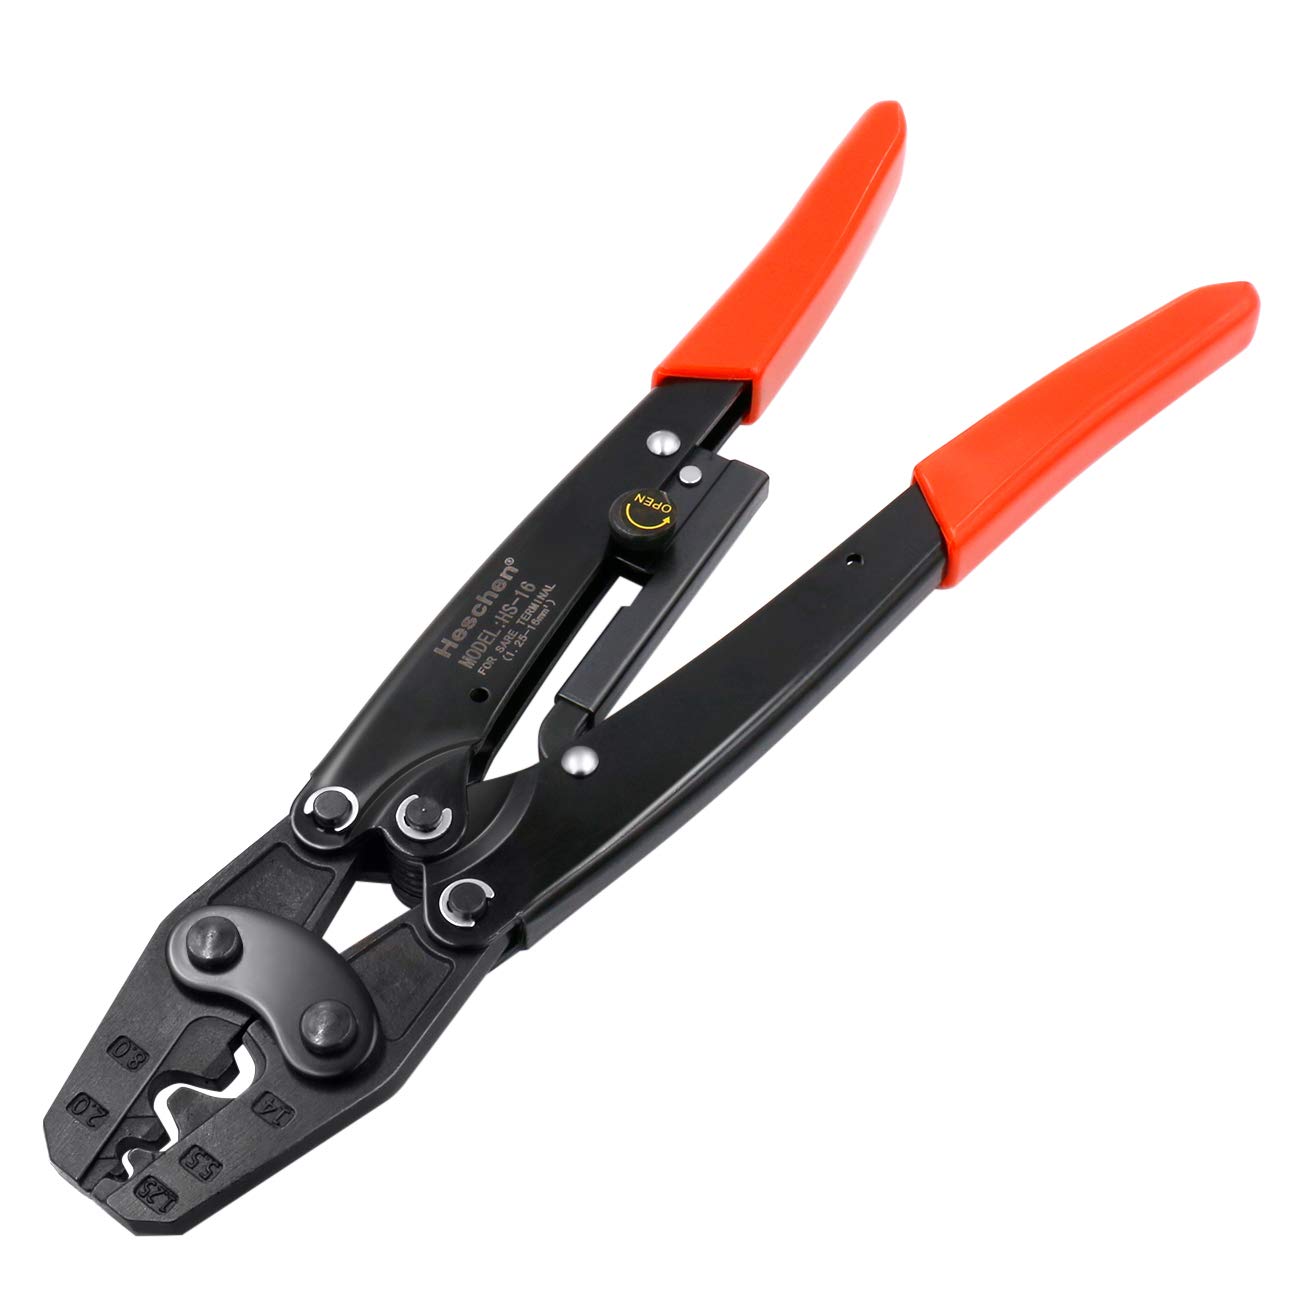 Heschen Ratchet Terminal Crimping Tool HS-16 Use for 1.5-16 mm² (15-5A